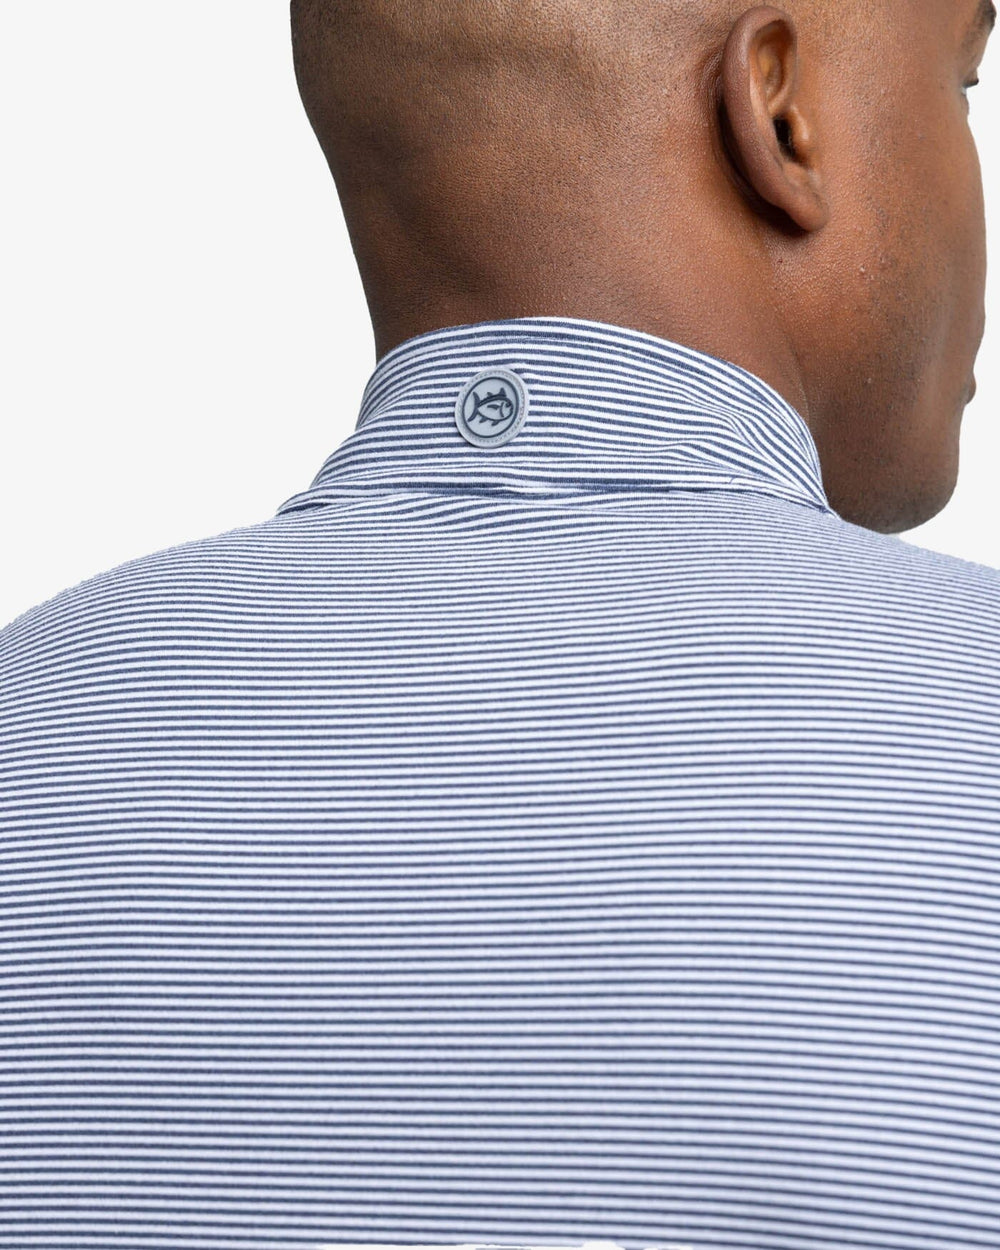 The yoke view of the Southern Tide Cruiser Micro-Stripe Heather Quarter Zip by Southern Tide - Heather Navy